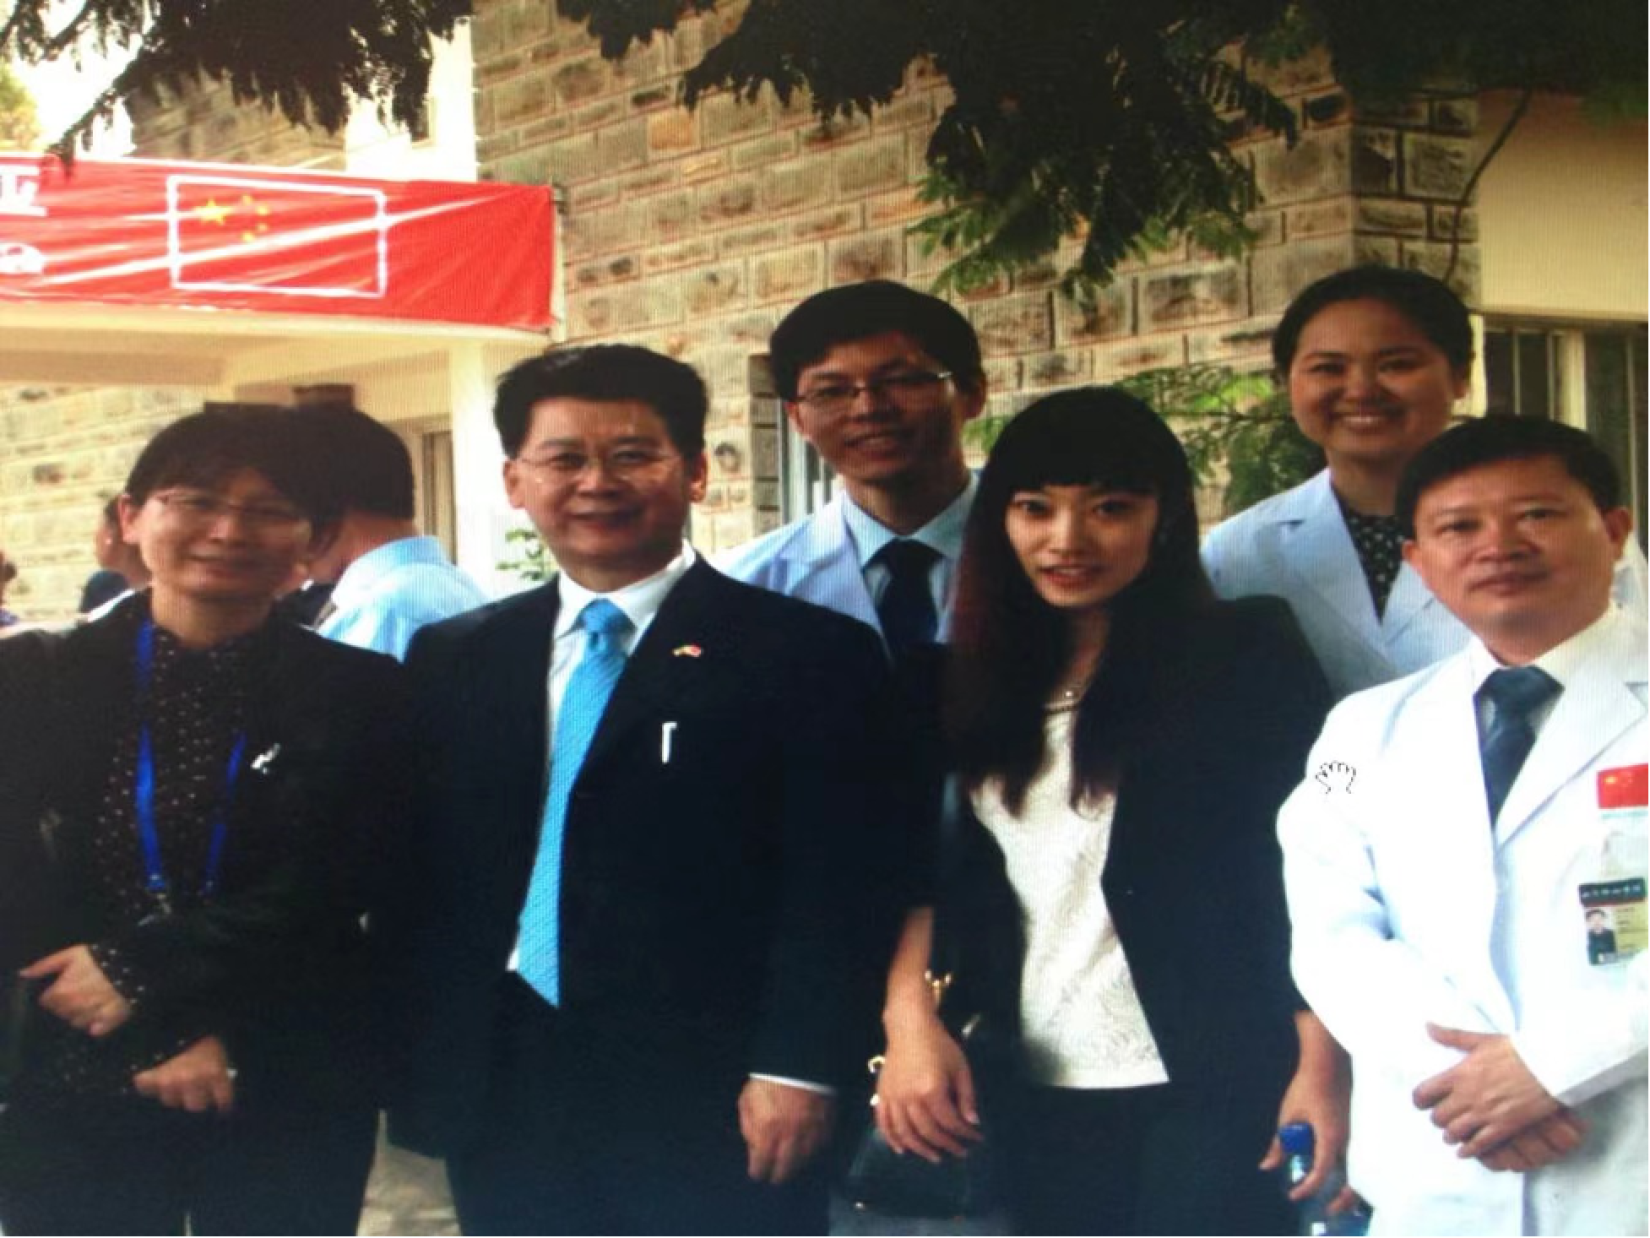 Ms. Zhang worked for the National Health Commission as a civil servant 